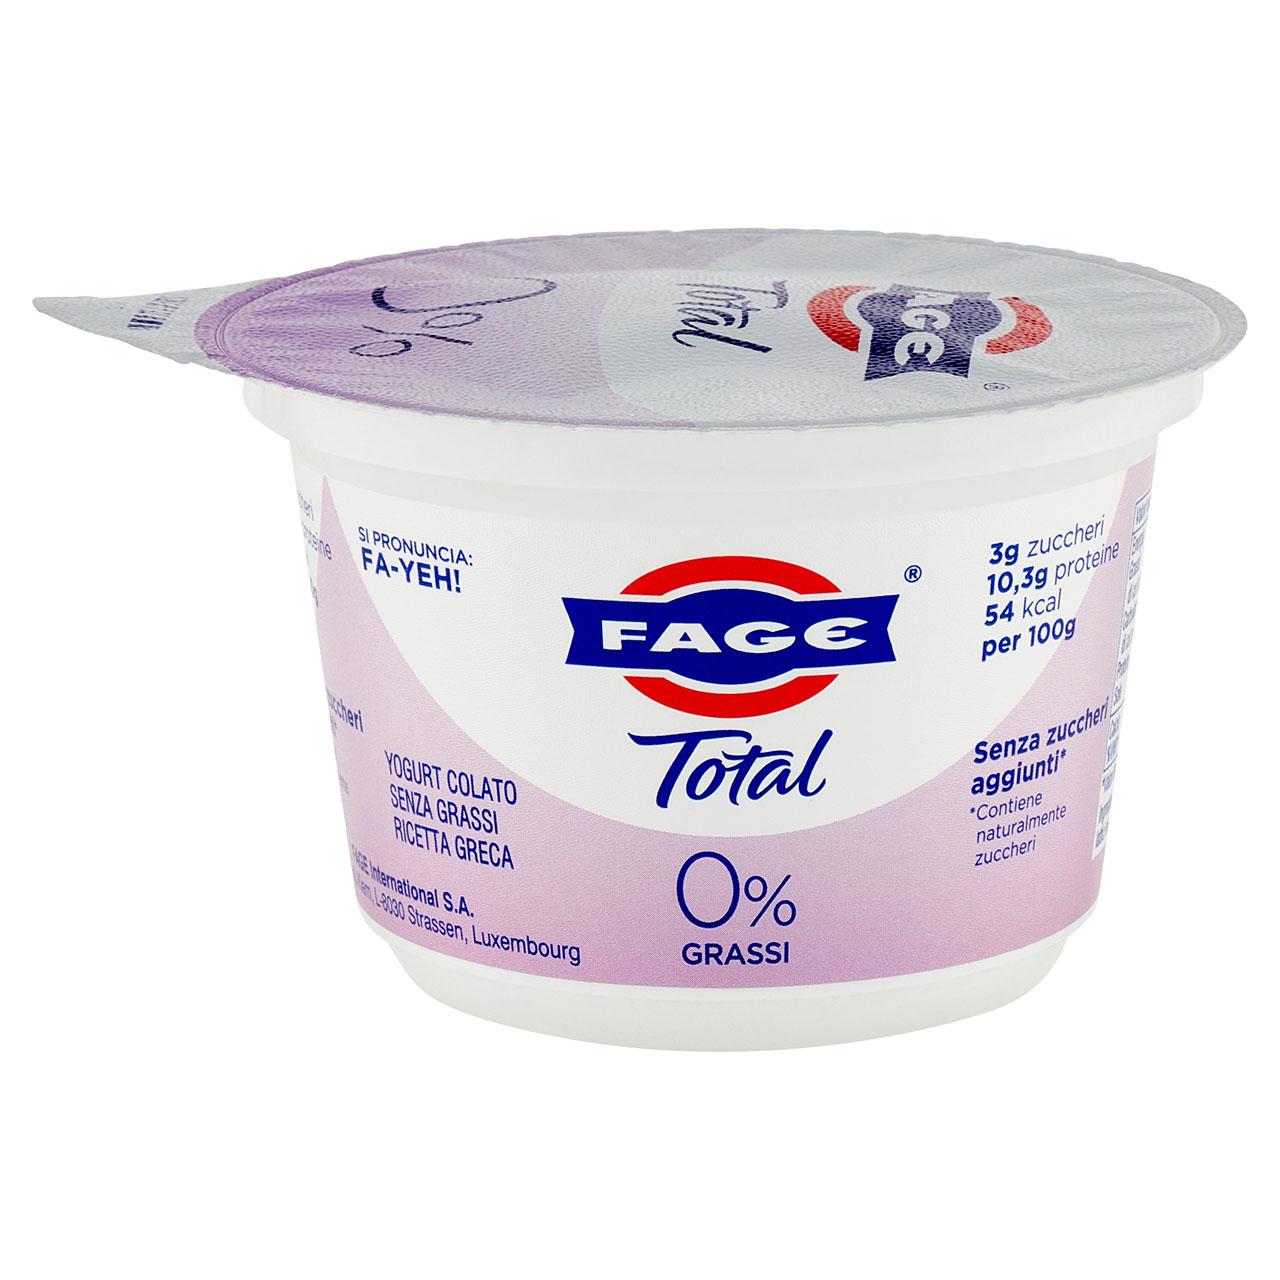 Fage Total 0% Grassi 150 g